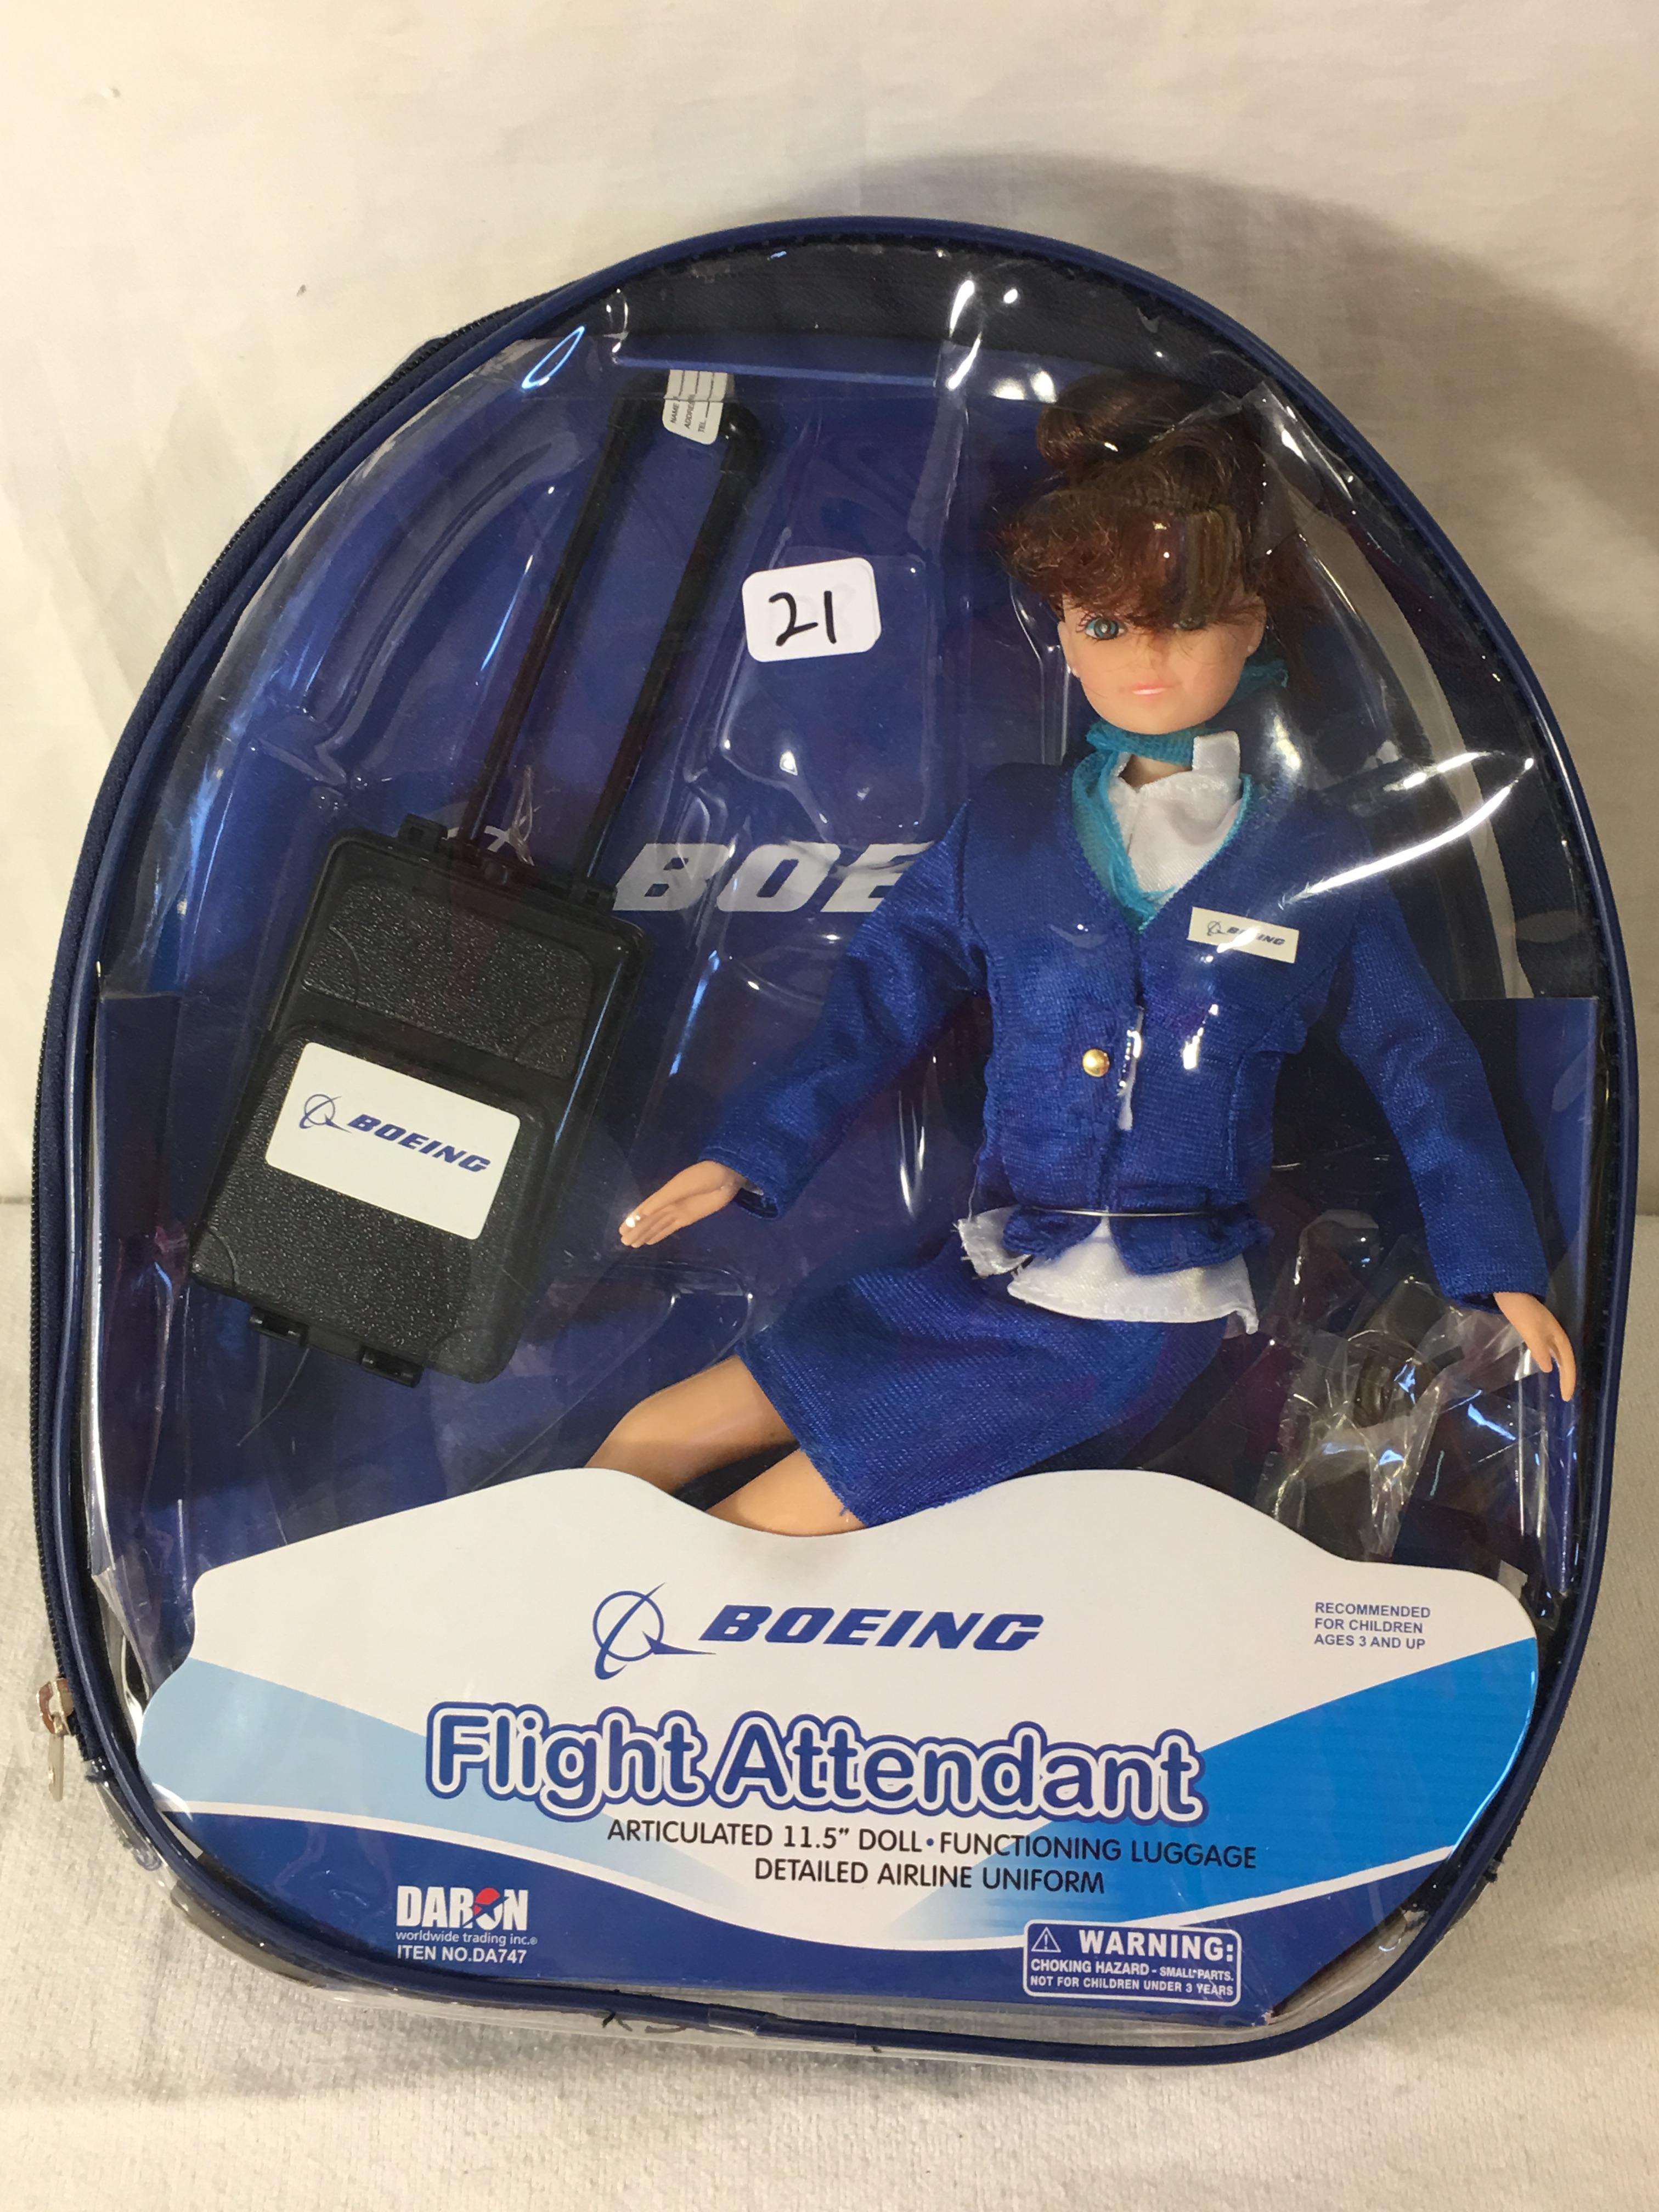 NIB Collector Daron Boeing Flight Attendant Doll in backpack case